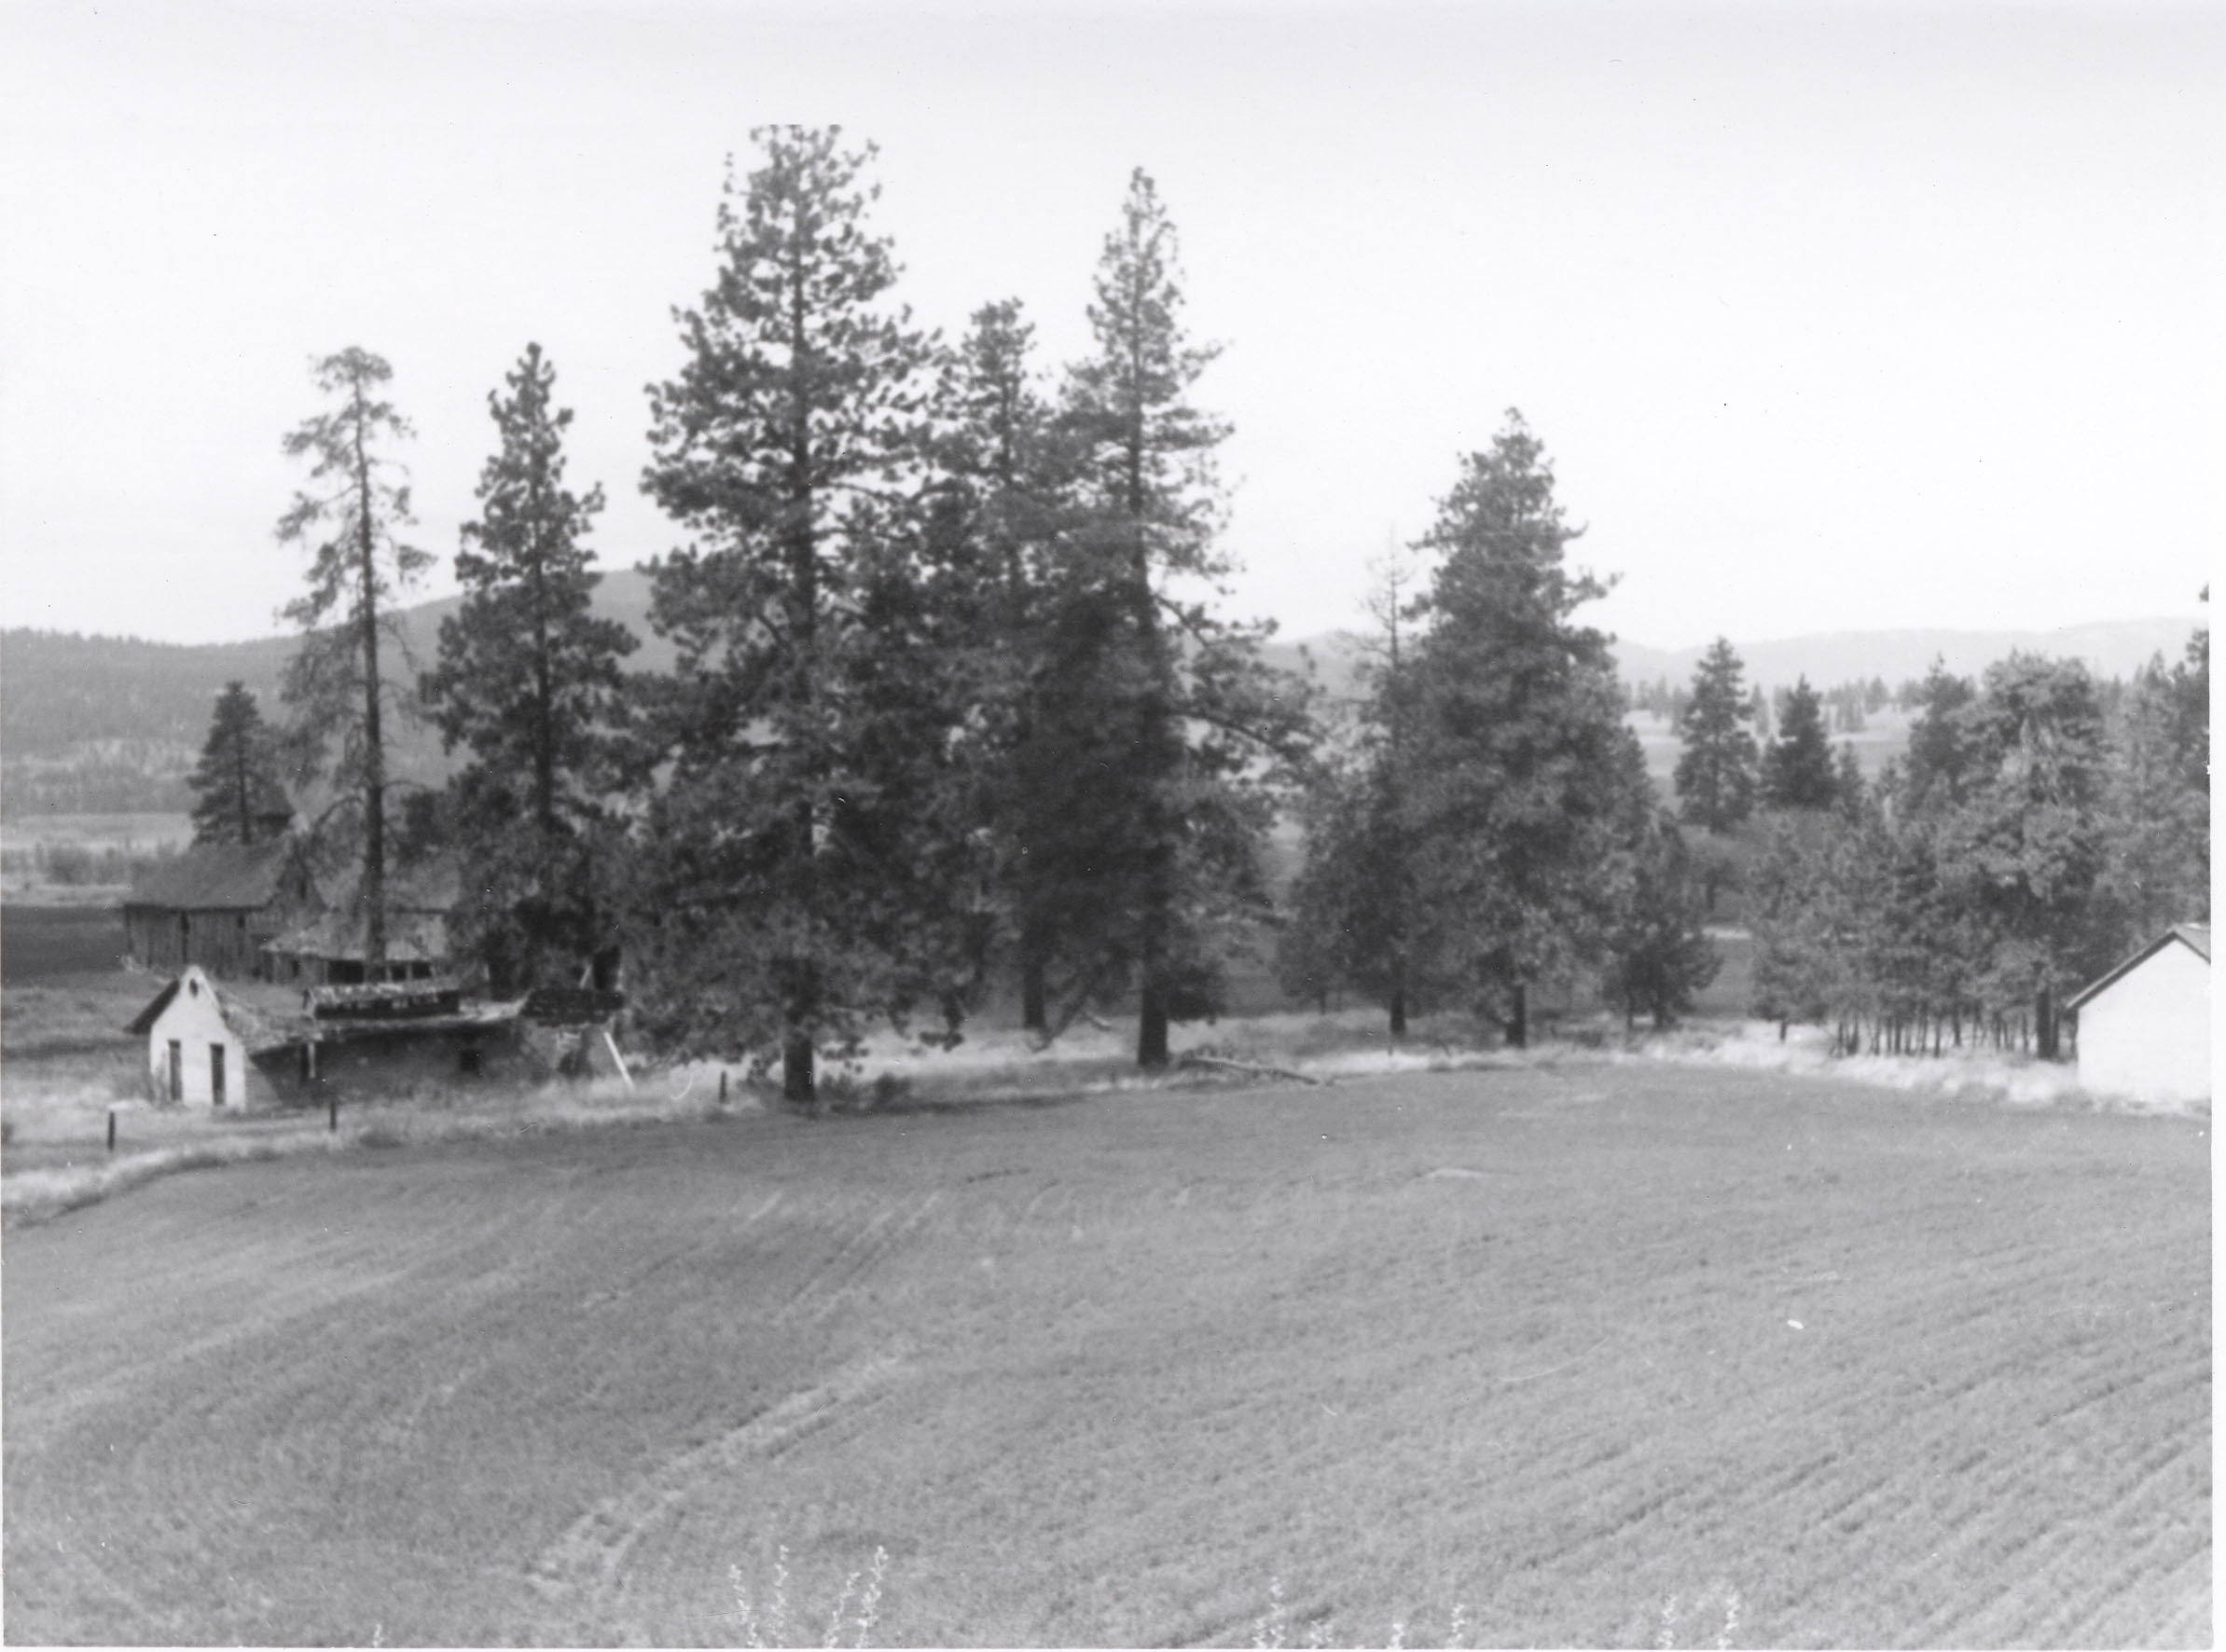 Black and white photograph of a field surrounded by trees and buildings